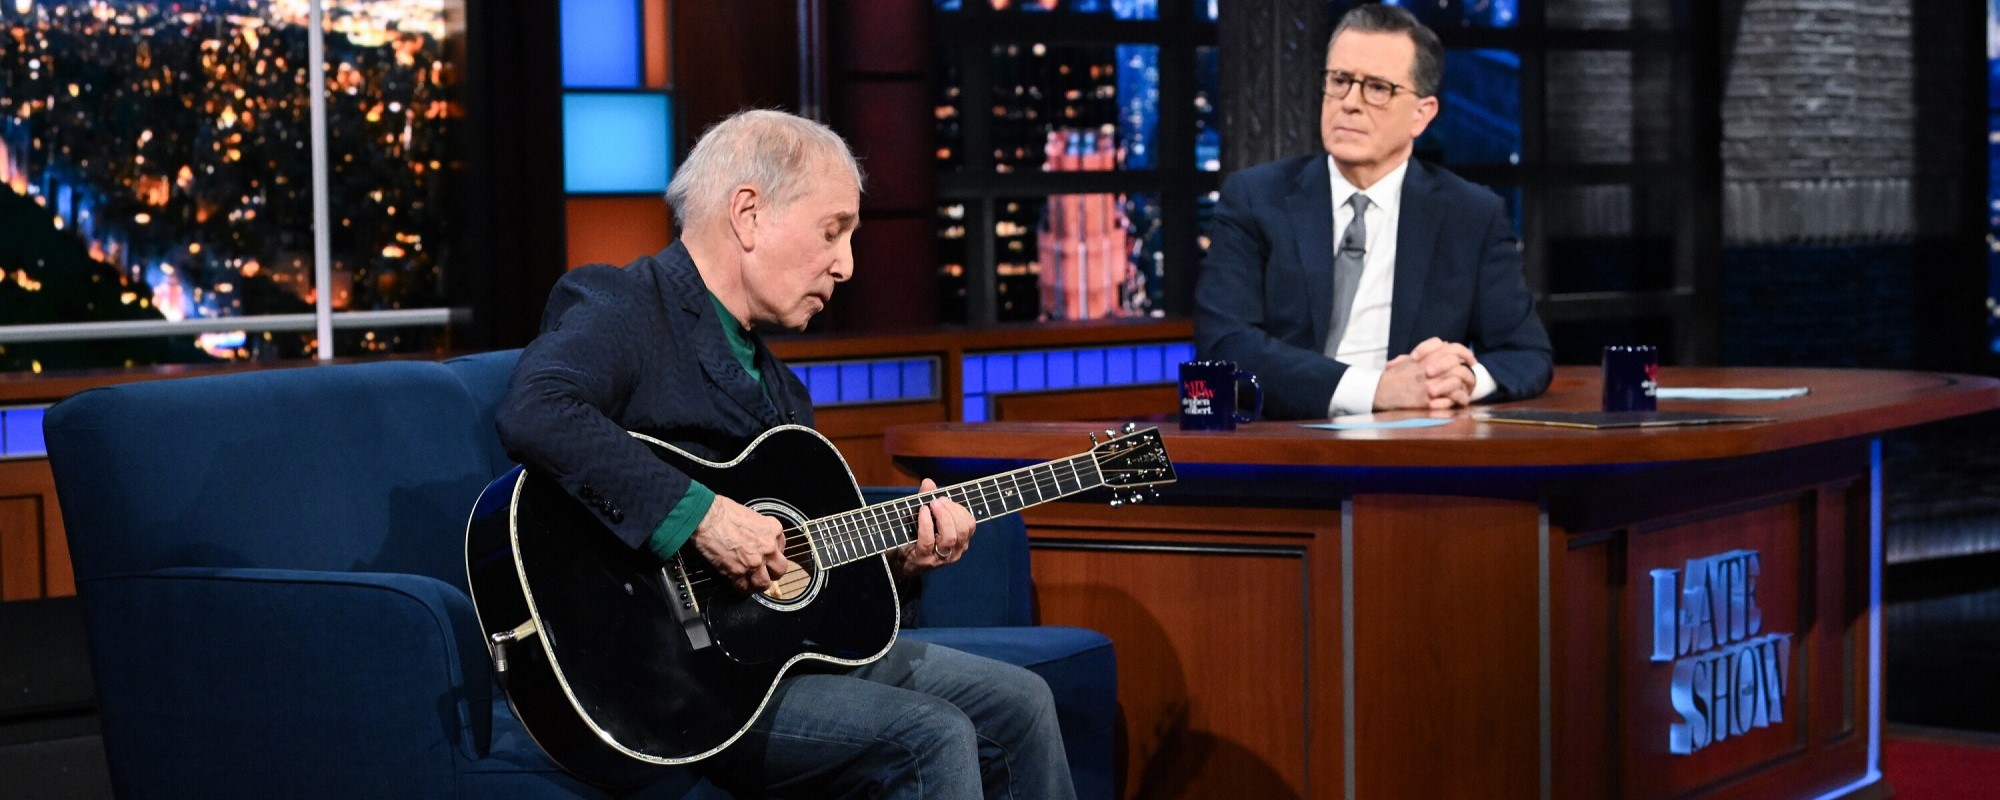 Paul Simon Reveals His Ideal Short Concert Set, Performs New Song on ‘The Late Show’